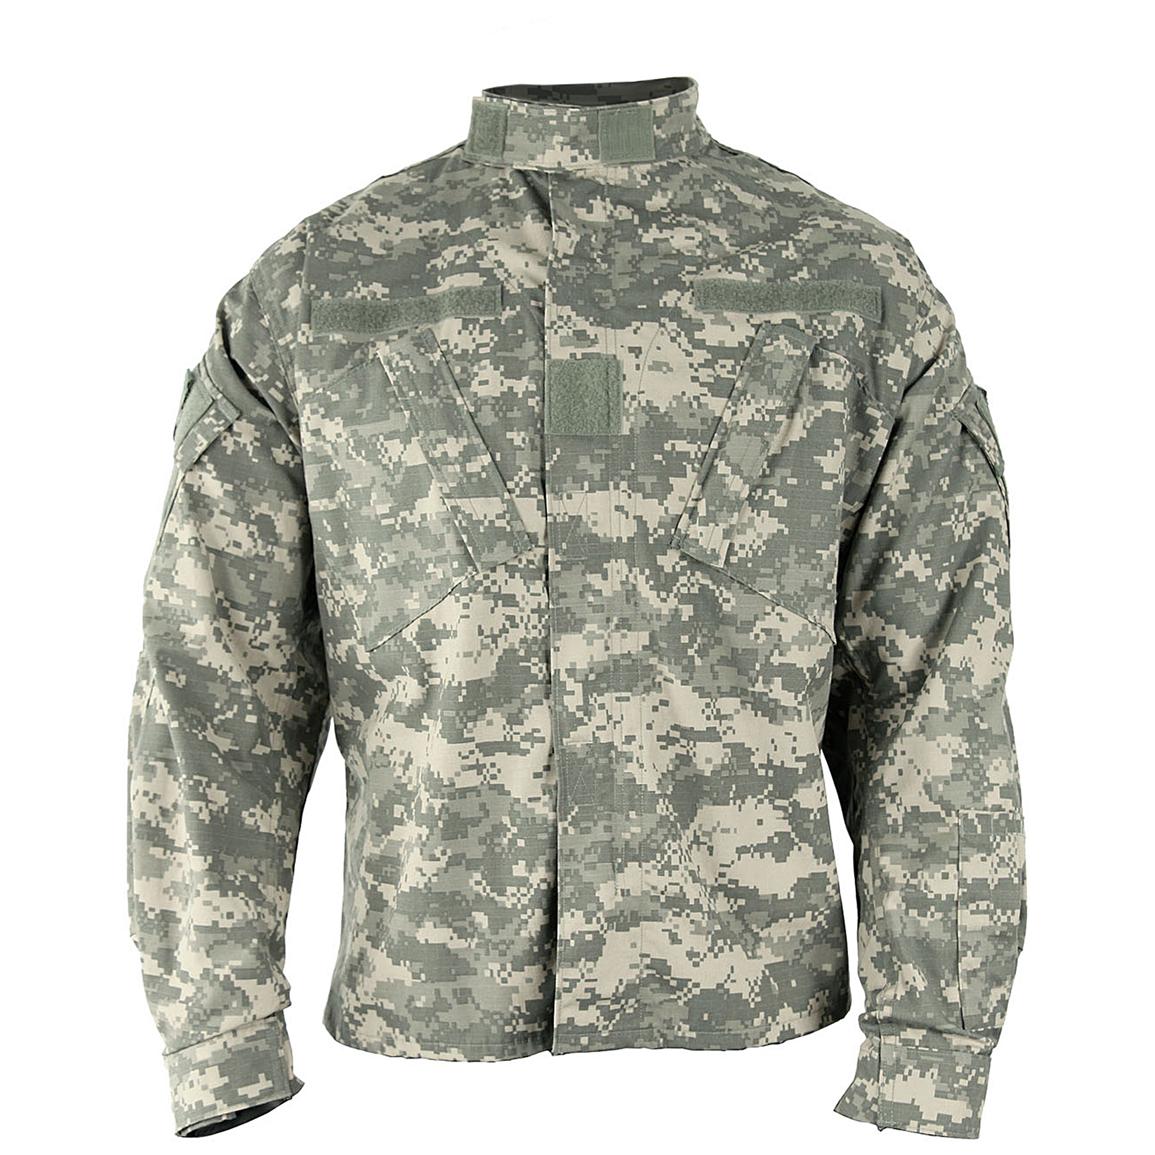 Propper™ Army Digital Camo ACU Jacket - 593624, Tactical Clothing at